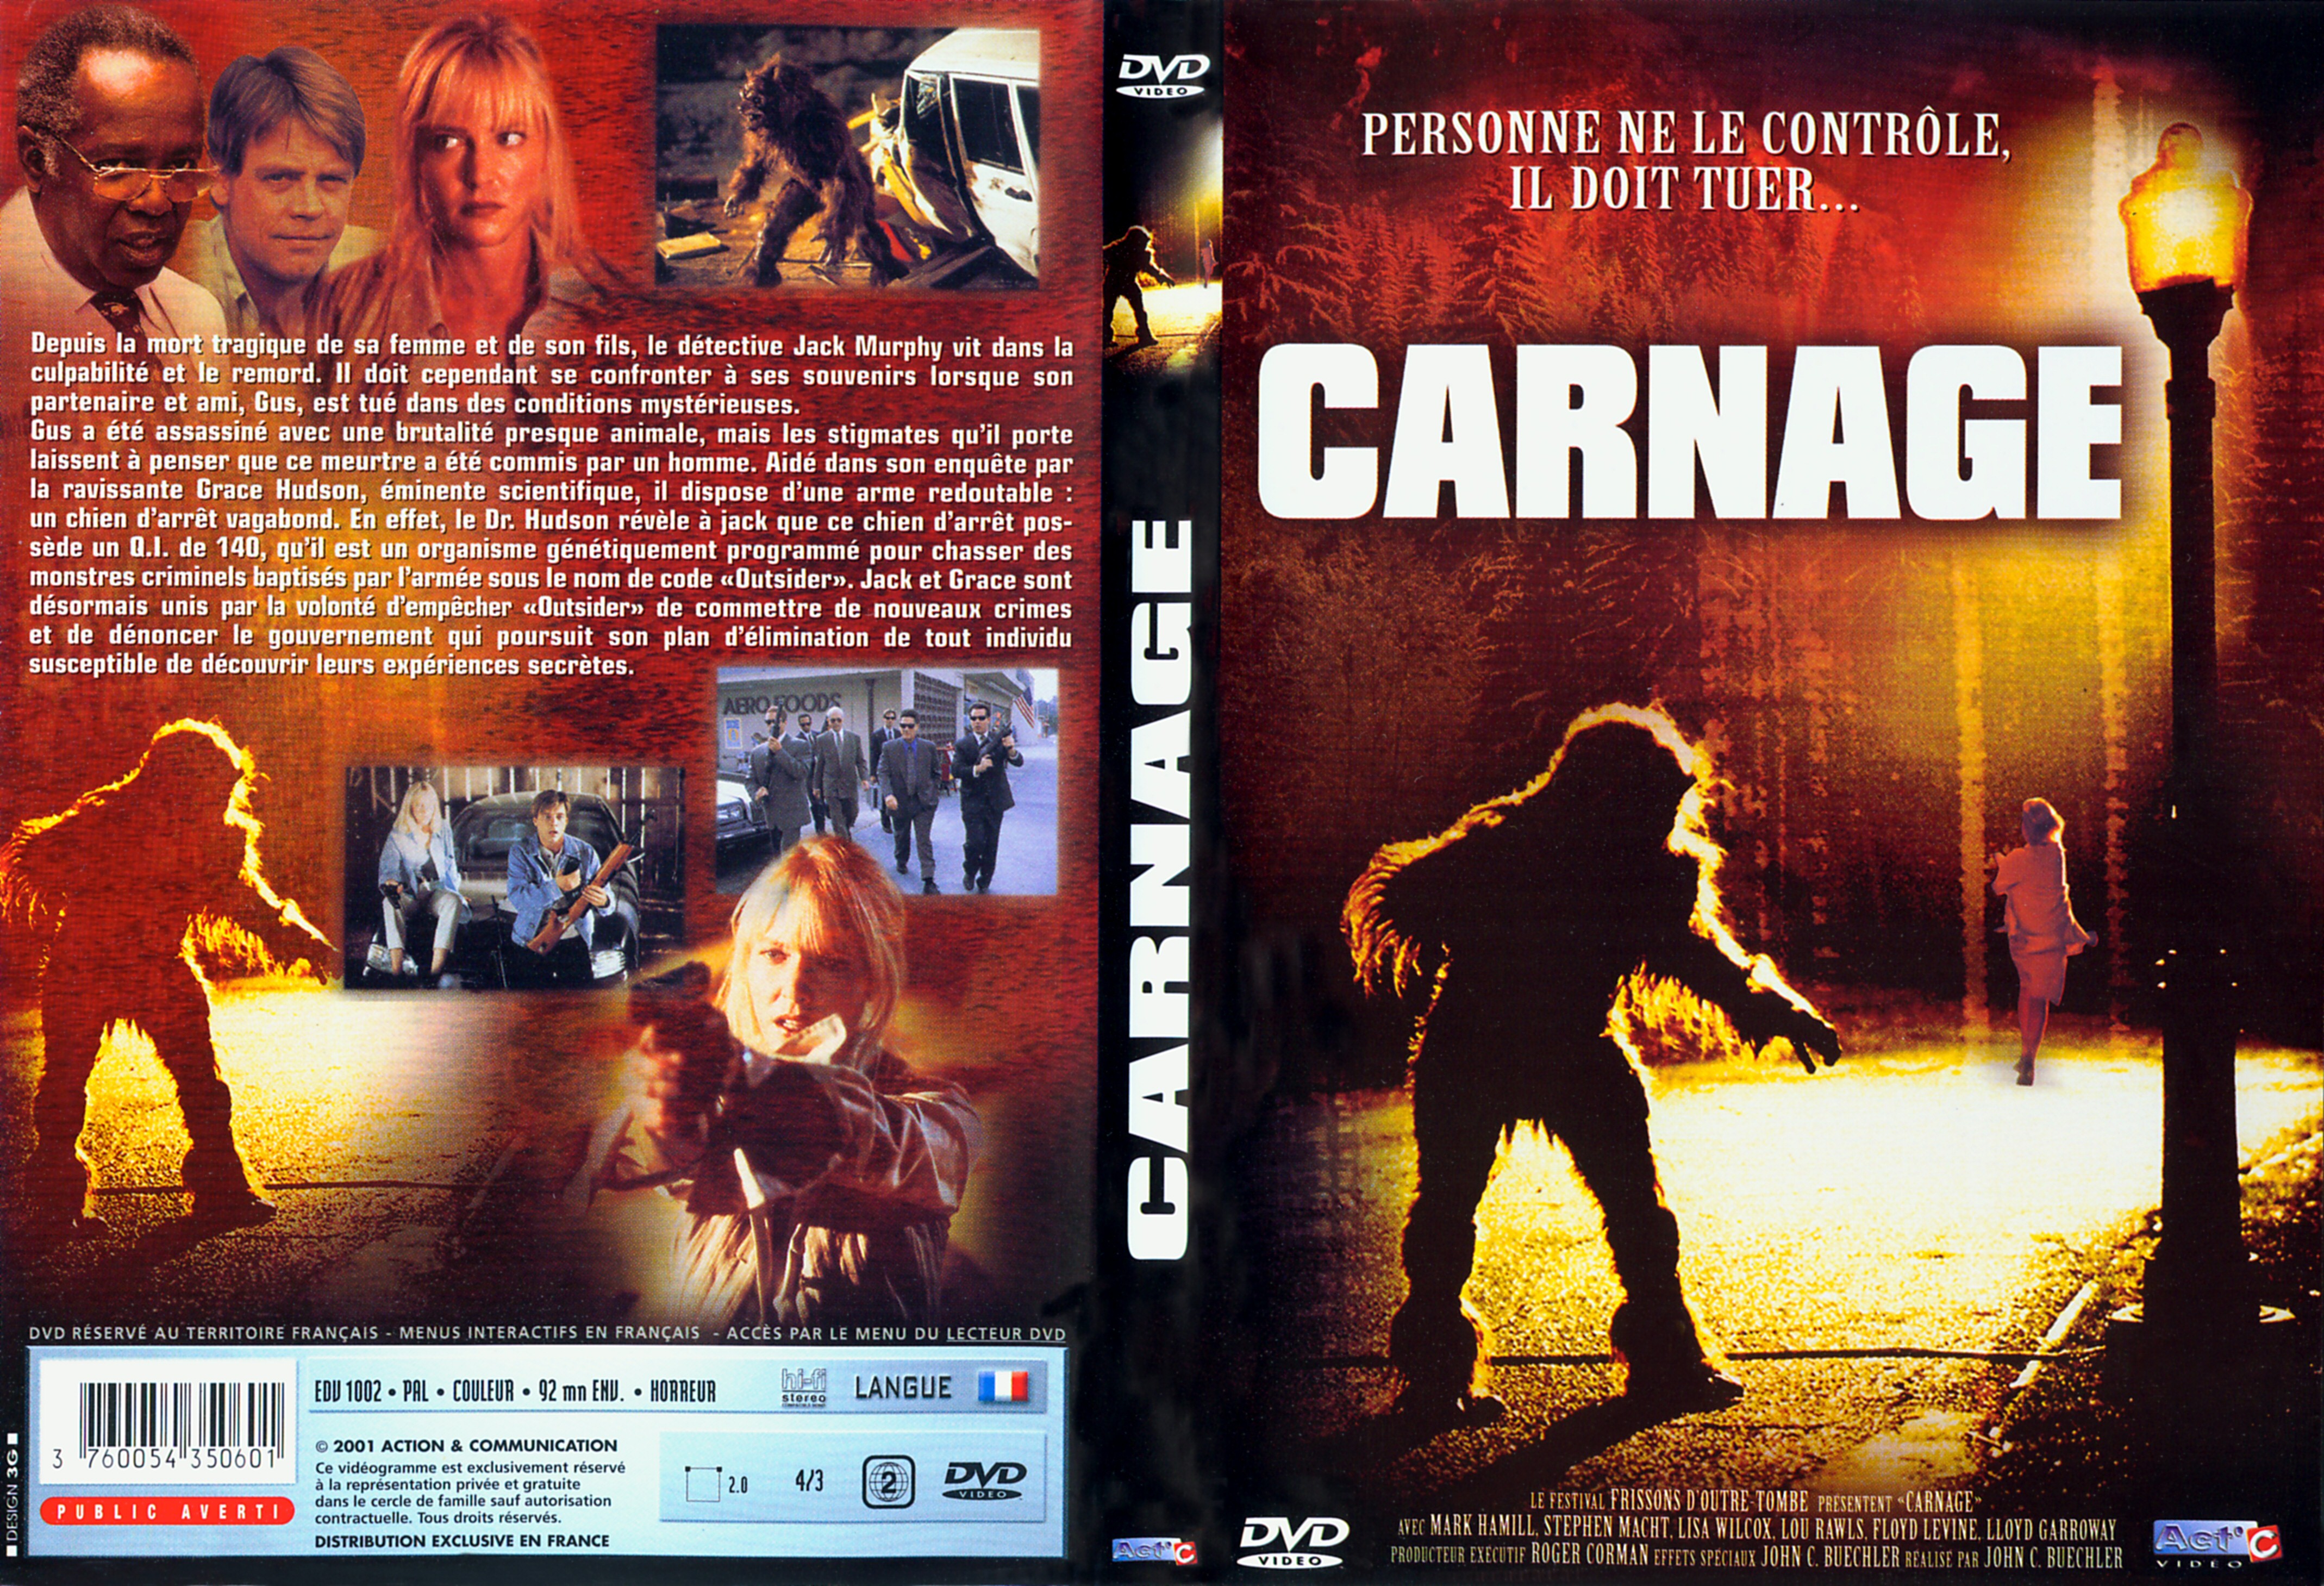 Jaquette DVD Carnage